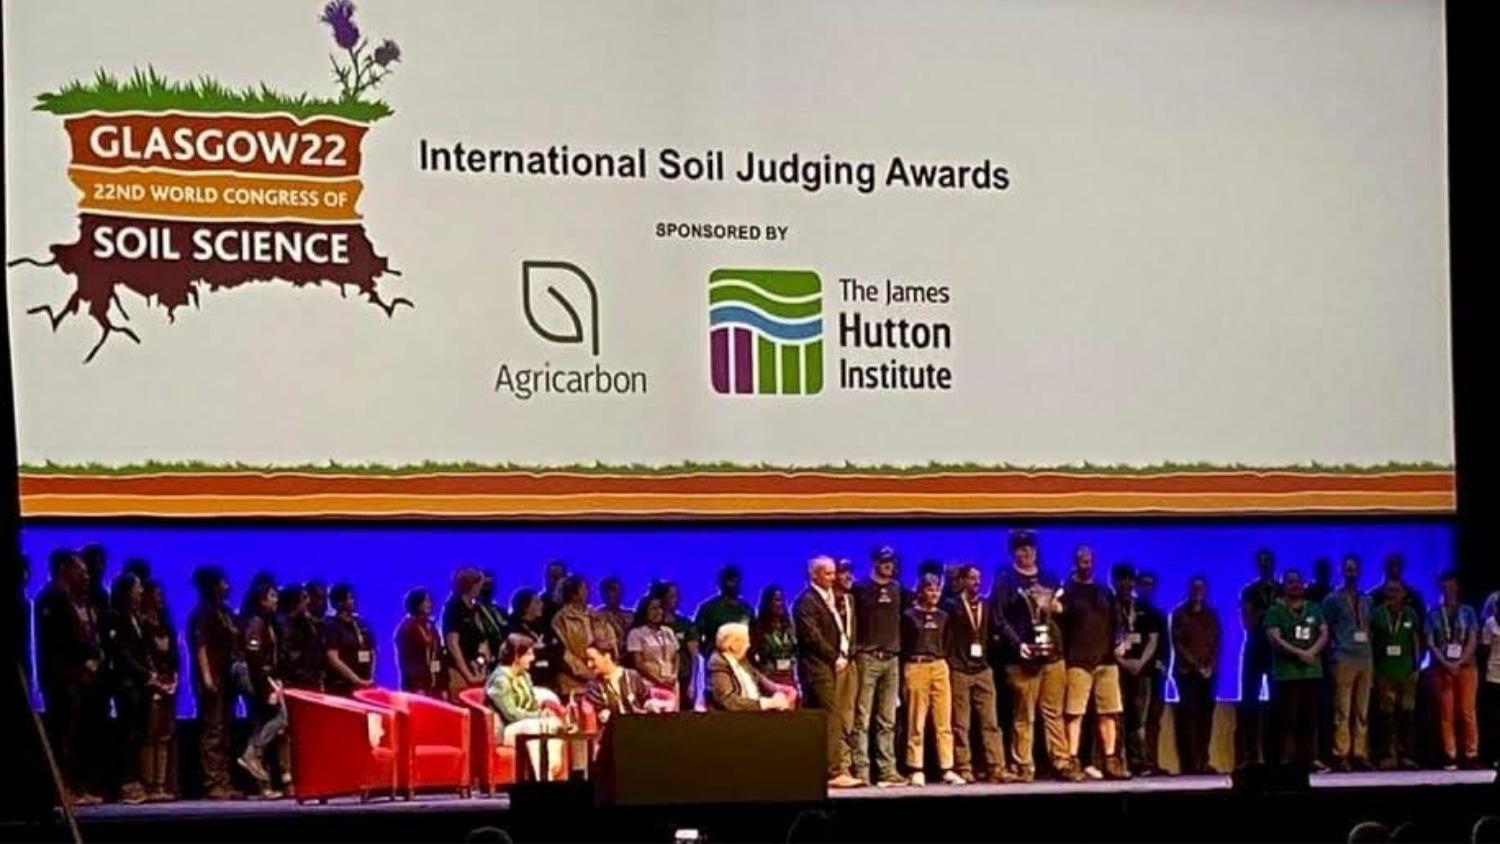 curtis Murphy and other Team USA members win the 2022 World Soil Judging